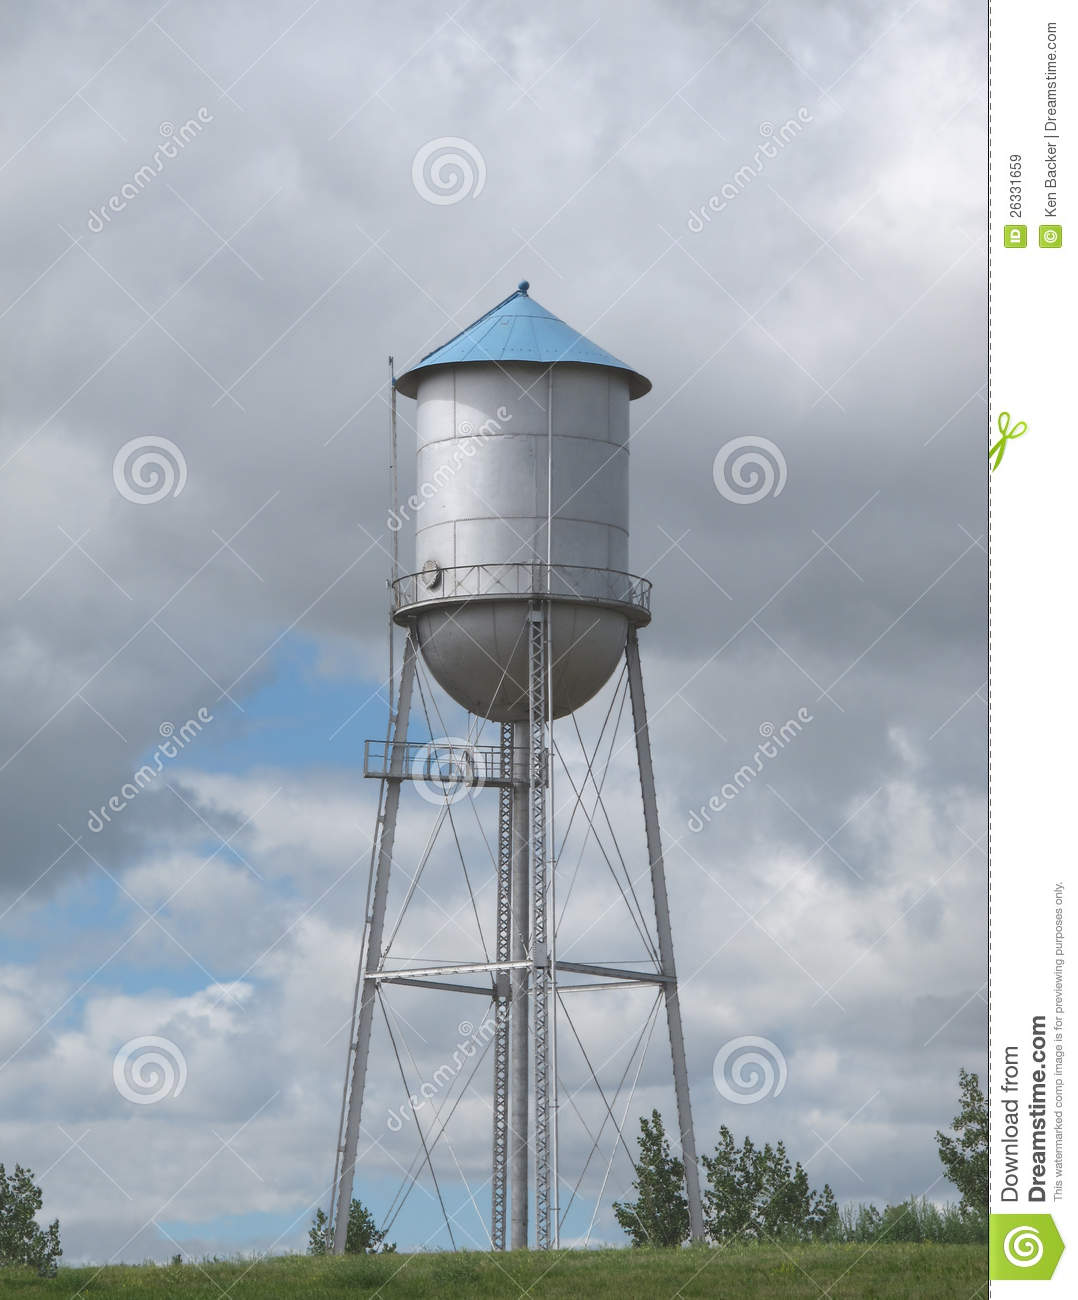 Old Fashioned Water Tower On A Hill  Royalty Free Stock Images   Image